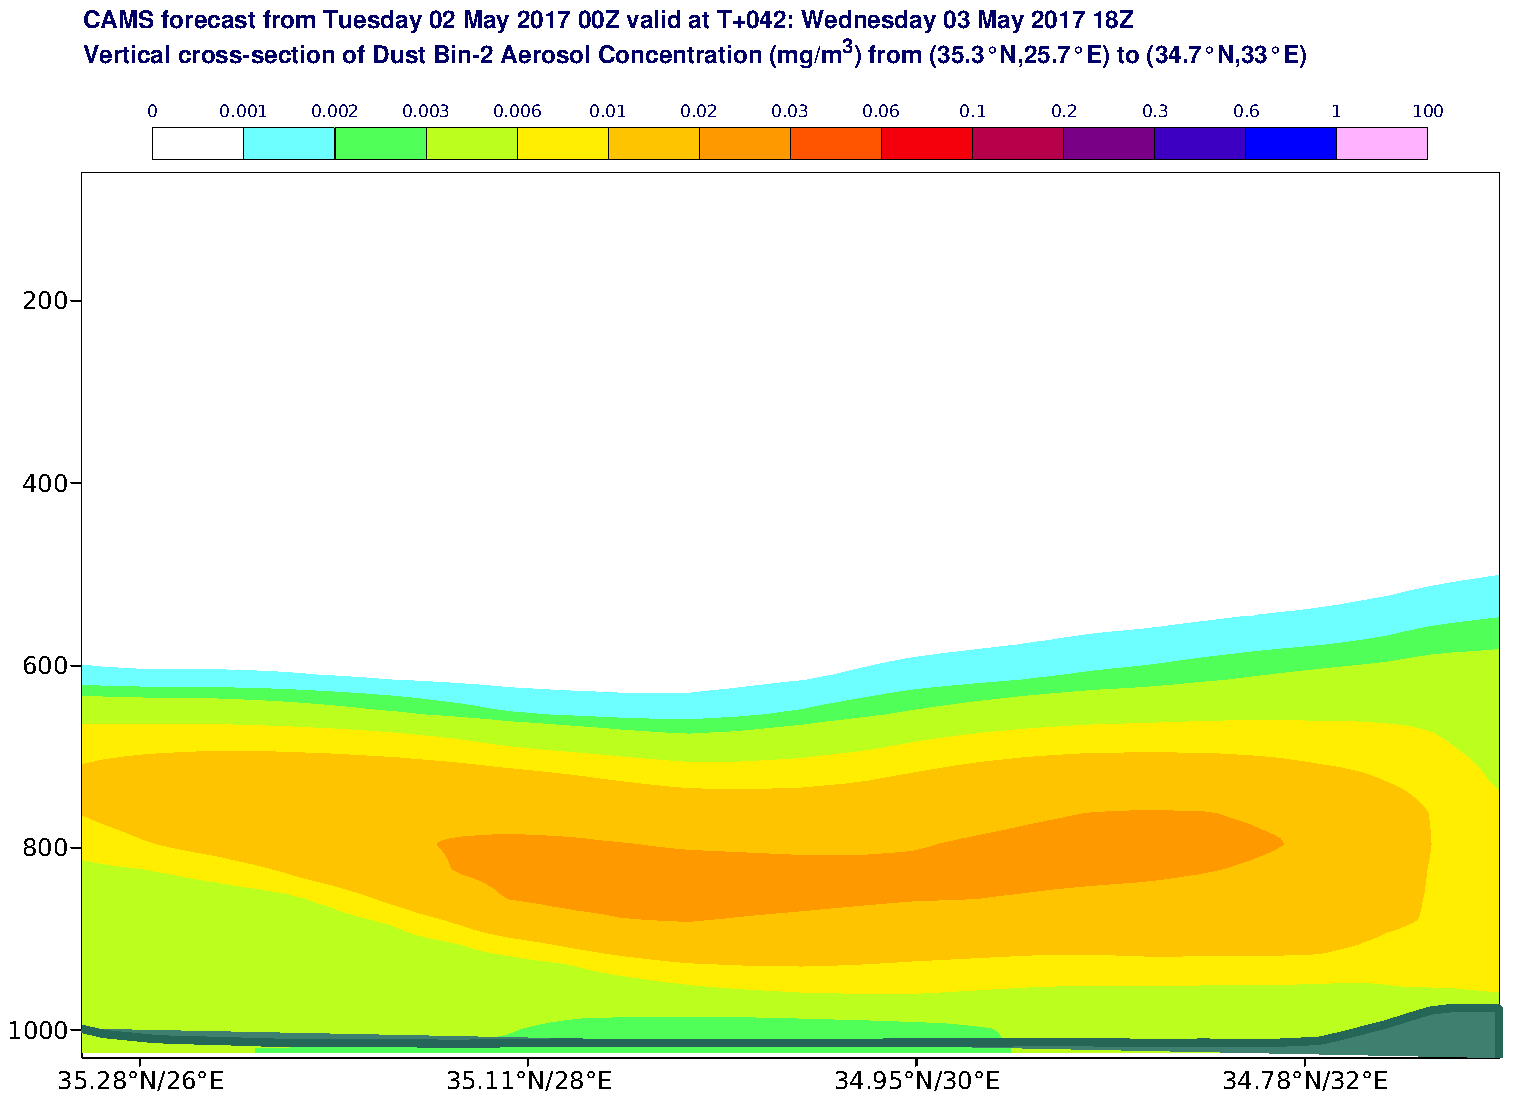 Vertical cross-section of Dust Bin-2 Aerosol Concentration (mg/m3) valid at T42 - 2017-05-03 18:00